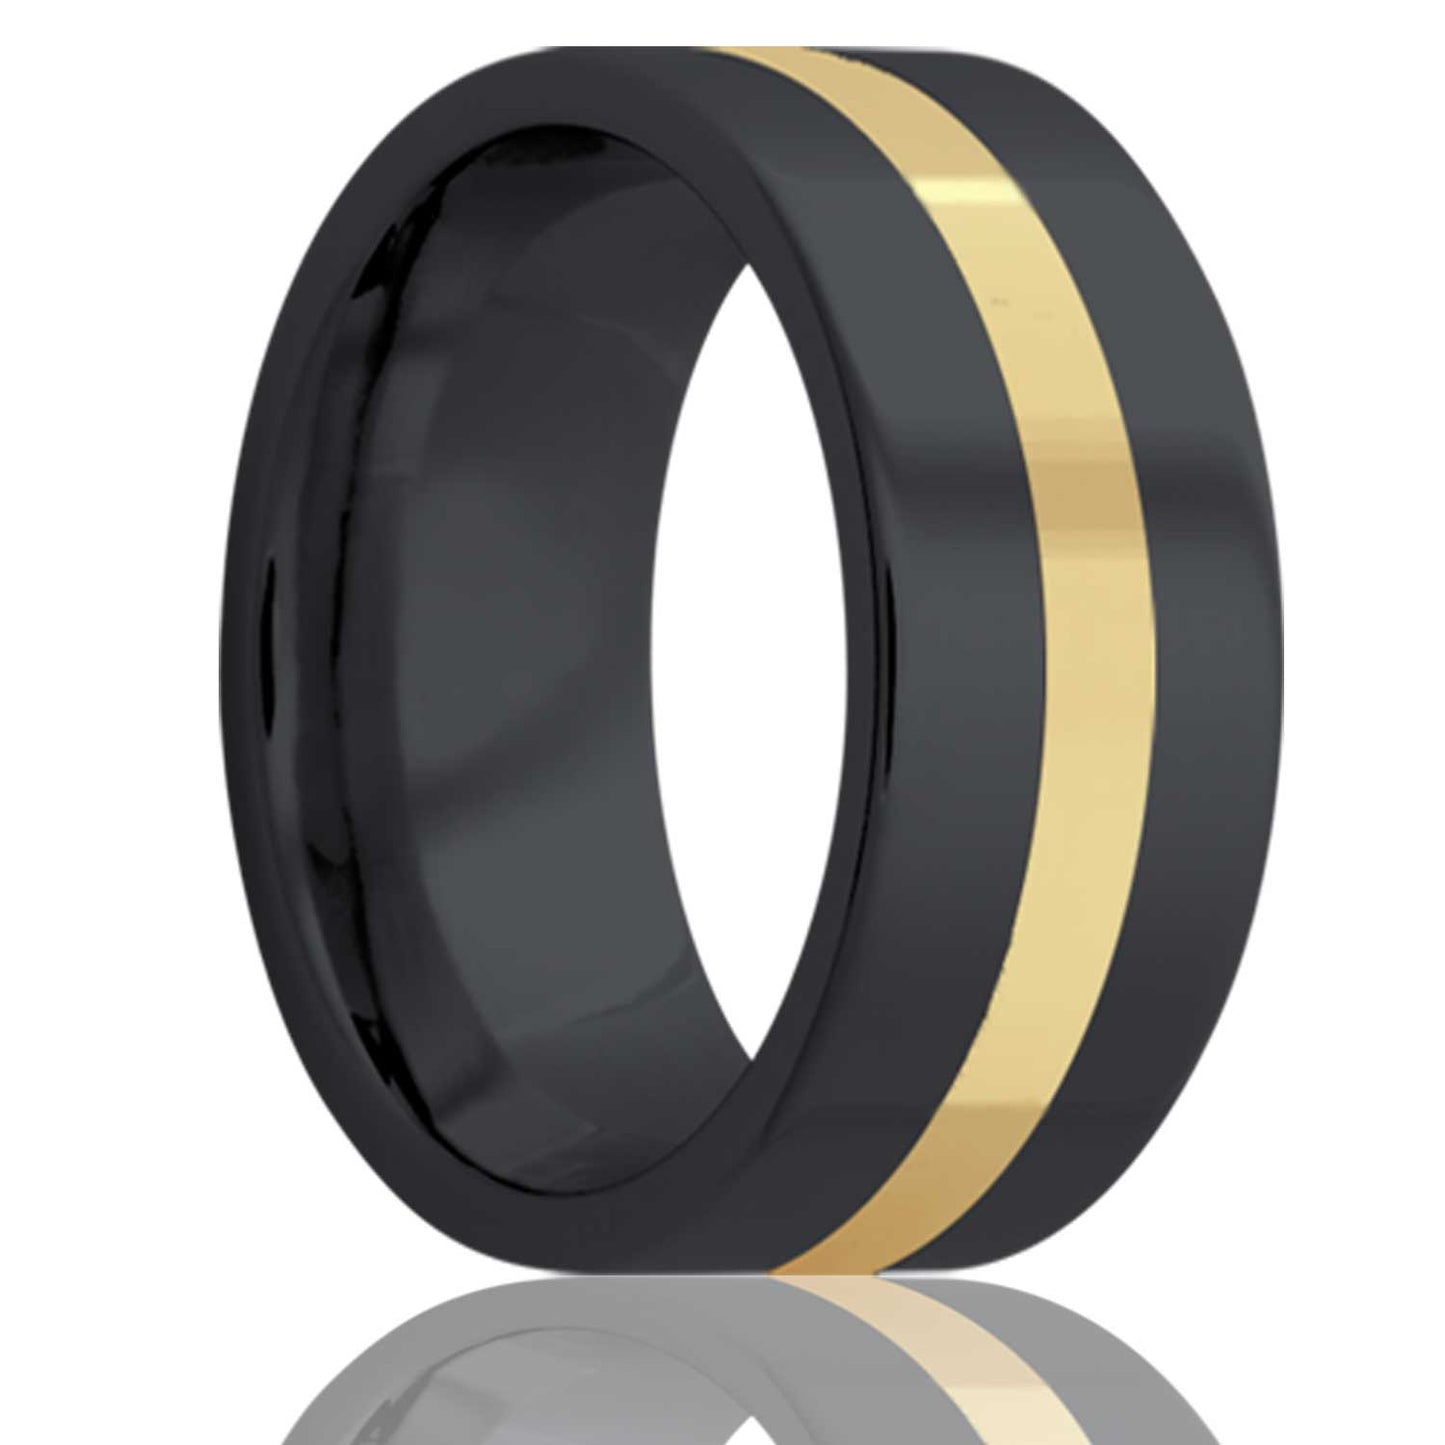 A 14k yellow gold inlaid zirconium wedding band displayed on a neutral white background.